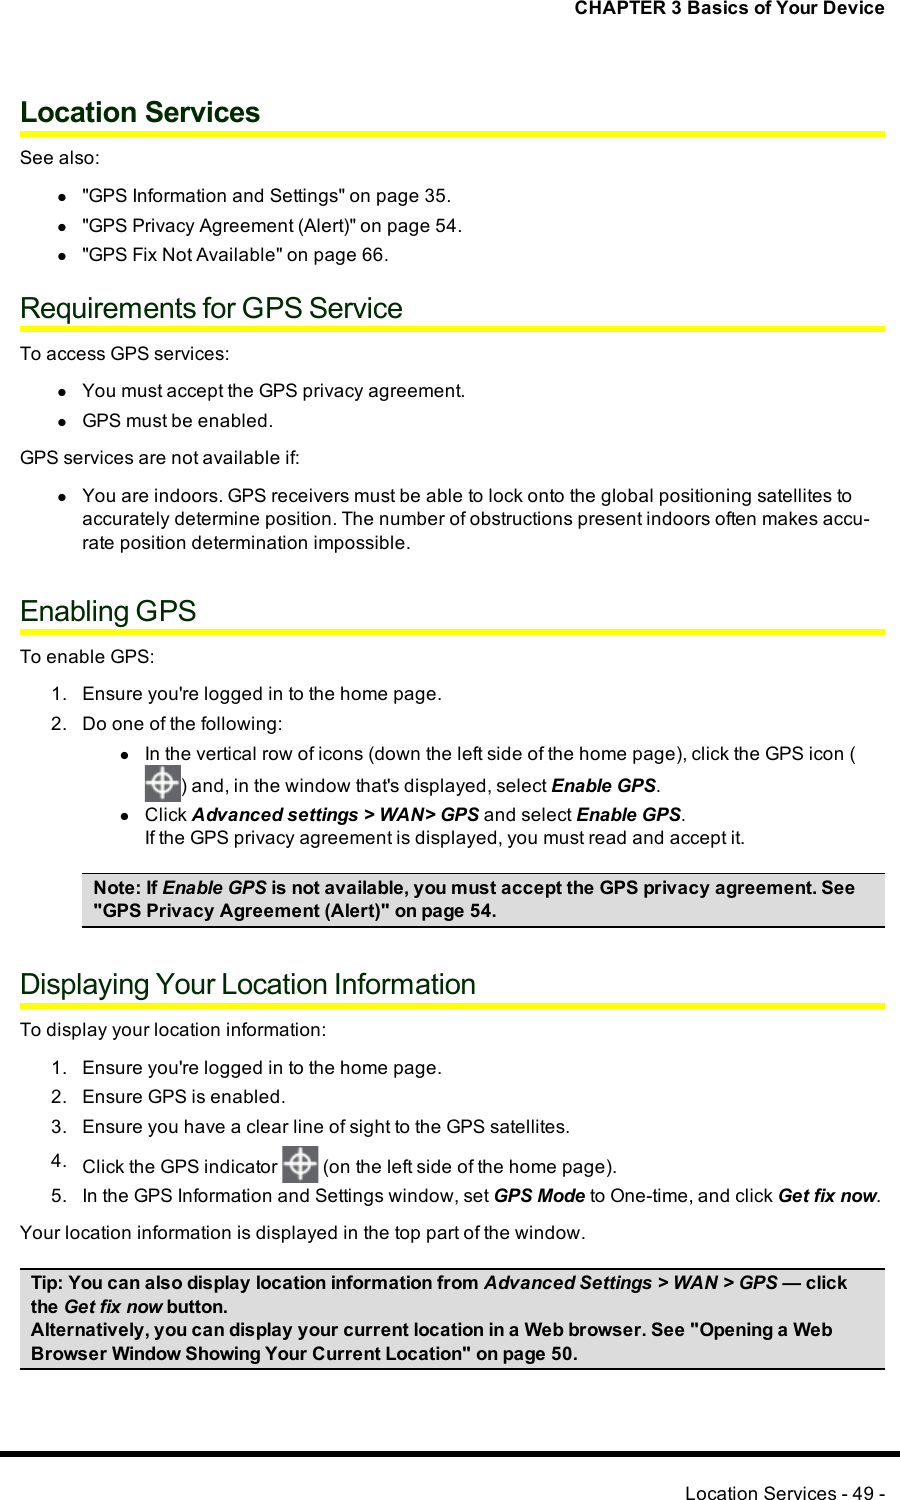 CHAPTER 3 Basics of Your DeviceLocation ServicesSee also:l&quot;GPS Information and Settings&quot; on page 35.l&quot;GPS Privacy Agreement (Alert)&quot; on page 54.l&quot;GPS Fix Not Available&quot; on page 66.Requirements for GPS ServiceTo access GPS services:lYou must accept the GPSprivacy agreement.lGPS must be enabled.GPS services are not available if:lYou are indoors. GPS receivers must be able to lock onto the global positioning satellites toaccurately determine position. The number of obstructions present indoors often makes accu-rate position determination impossible.Enabling GPSTo enable GPS:1. Ensure you&apos;re logged in to the home page.2. Do one of the following:lIn the vertical row of icons (down the left side of the home page), click the GPS icon () and, in the window that&apos;s displayed, select Enable GPS.lClick Advanced settings &gt; WAN&gt; GPS and select Enable GPS.If the GPSprivacy agreement is displayed, you must read and accept it.Note:If Enable GPSis not available, you must accept the GPSprivacy agreement. See&quot;GPS Privacy Agreement (Alert)&quot; on page 54.Displaying Your Location InformationTo display your location information:1. Ensure you&apos;re logged in to the home page.2. Ensure GPS is enabled.3. Ensure you have a clear line of sight to the GPS satellites.4. Click the GPS indicator (on the left side of the home page).5. In the GPS Information and Settings window, set GPSMode to One-time, and click Get fix now.Your location information is displayed in the top part of the window.Tip:You can also display location information from Advanced Settings &gt; WAN &gt; GPS — clickthe Get fix now button.Alternatively, you can display your current location in a Web browser. See &quot;Opening a WebBrowser Window Showing Your Current Location&quot; on page 50.Location Services - 49 -